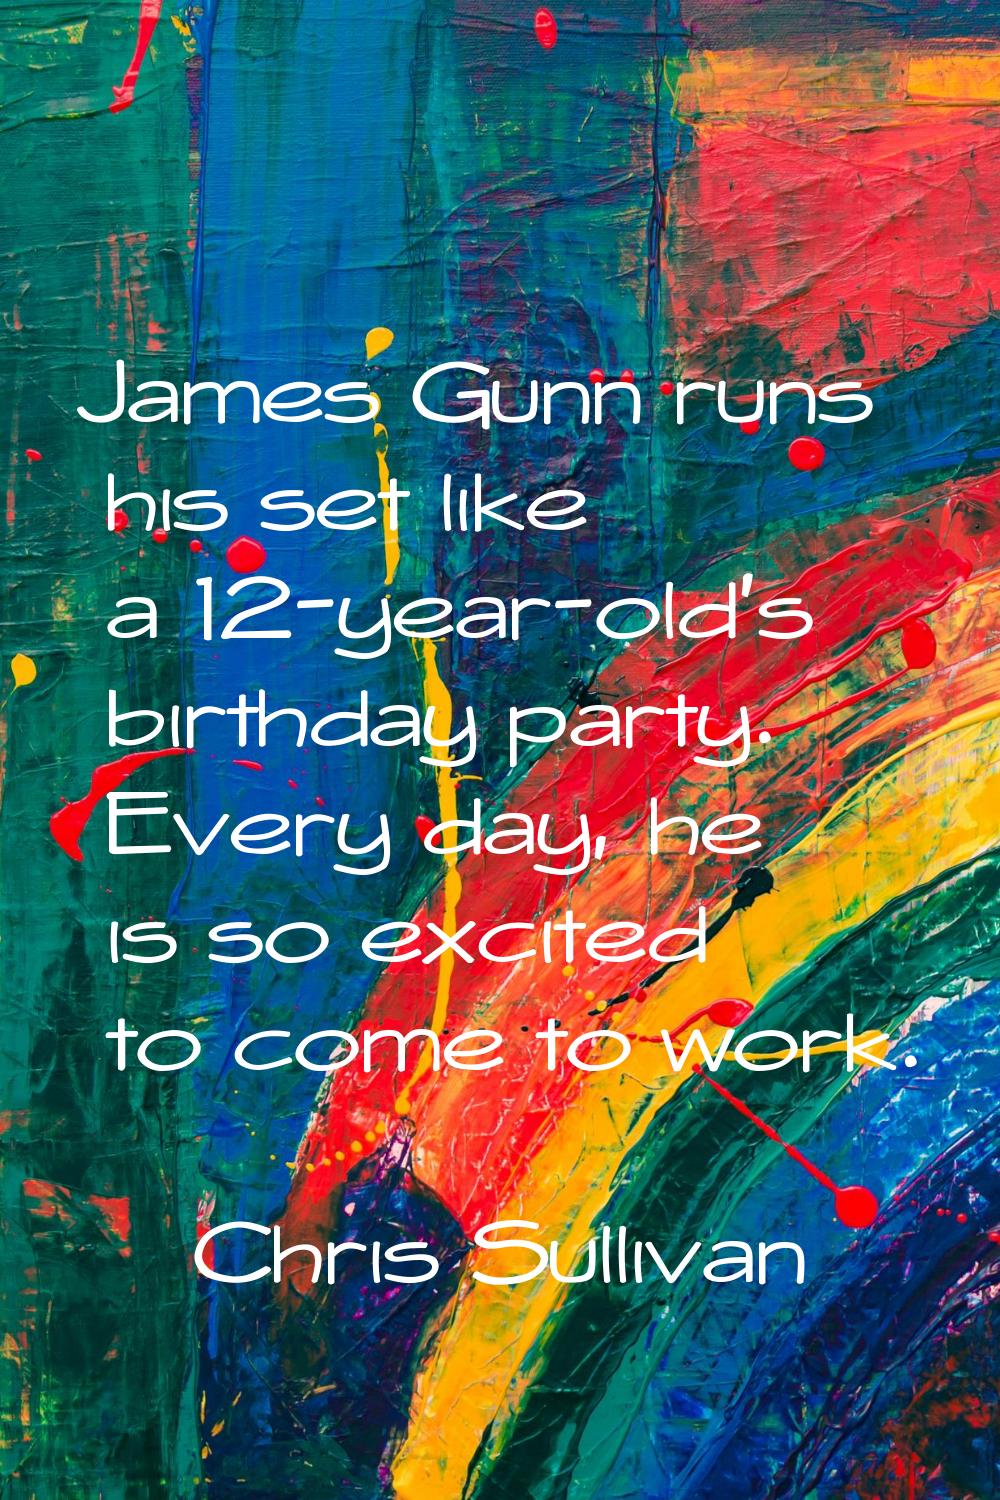 James Gunn runs his set like a 12-year-old's birthday party. Every day, he is so excited to come to